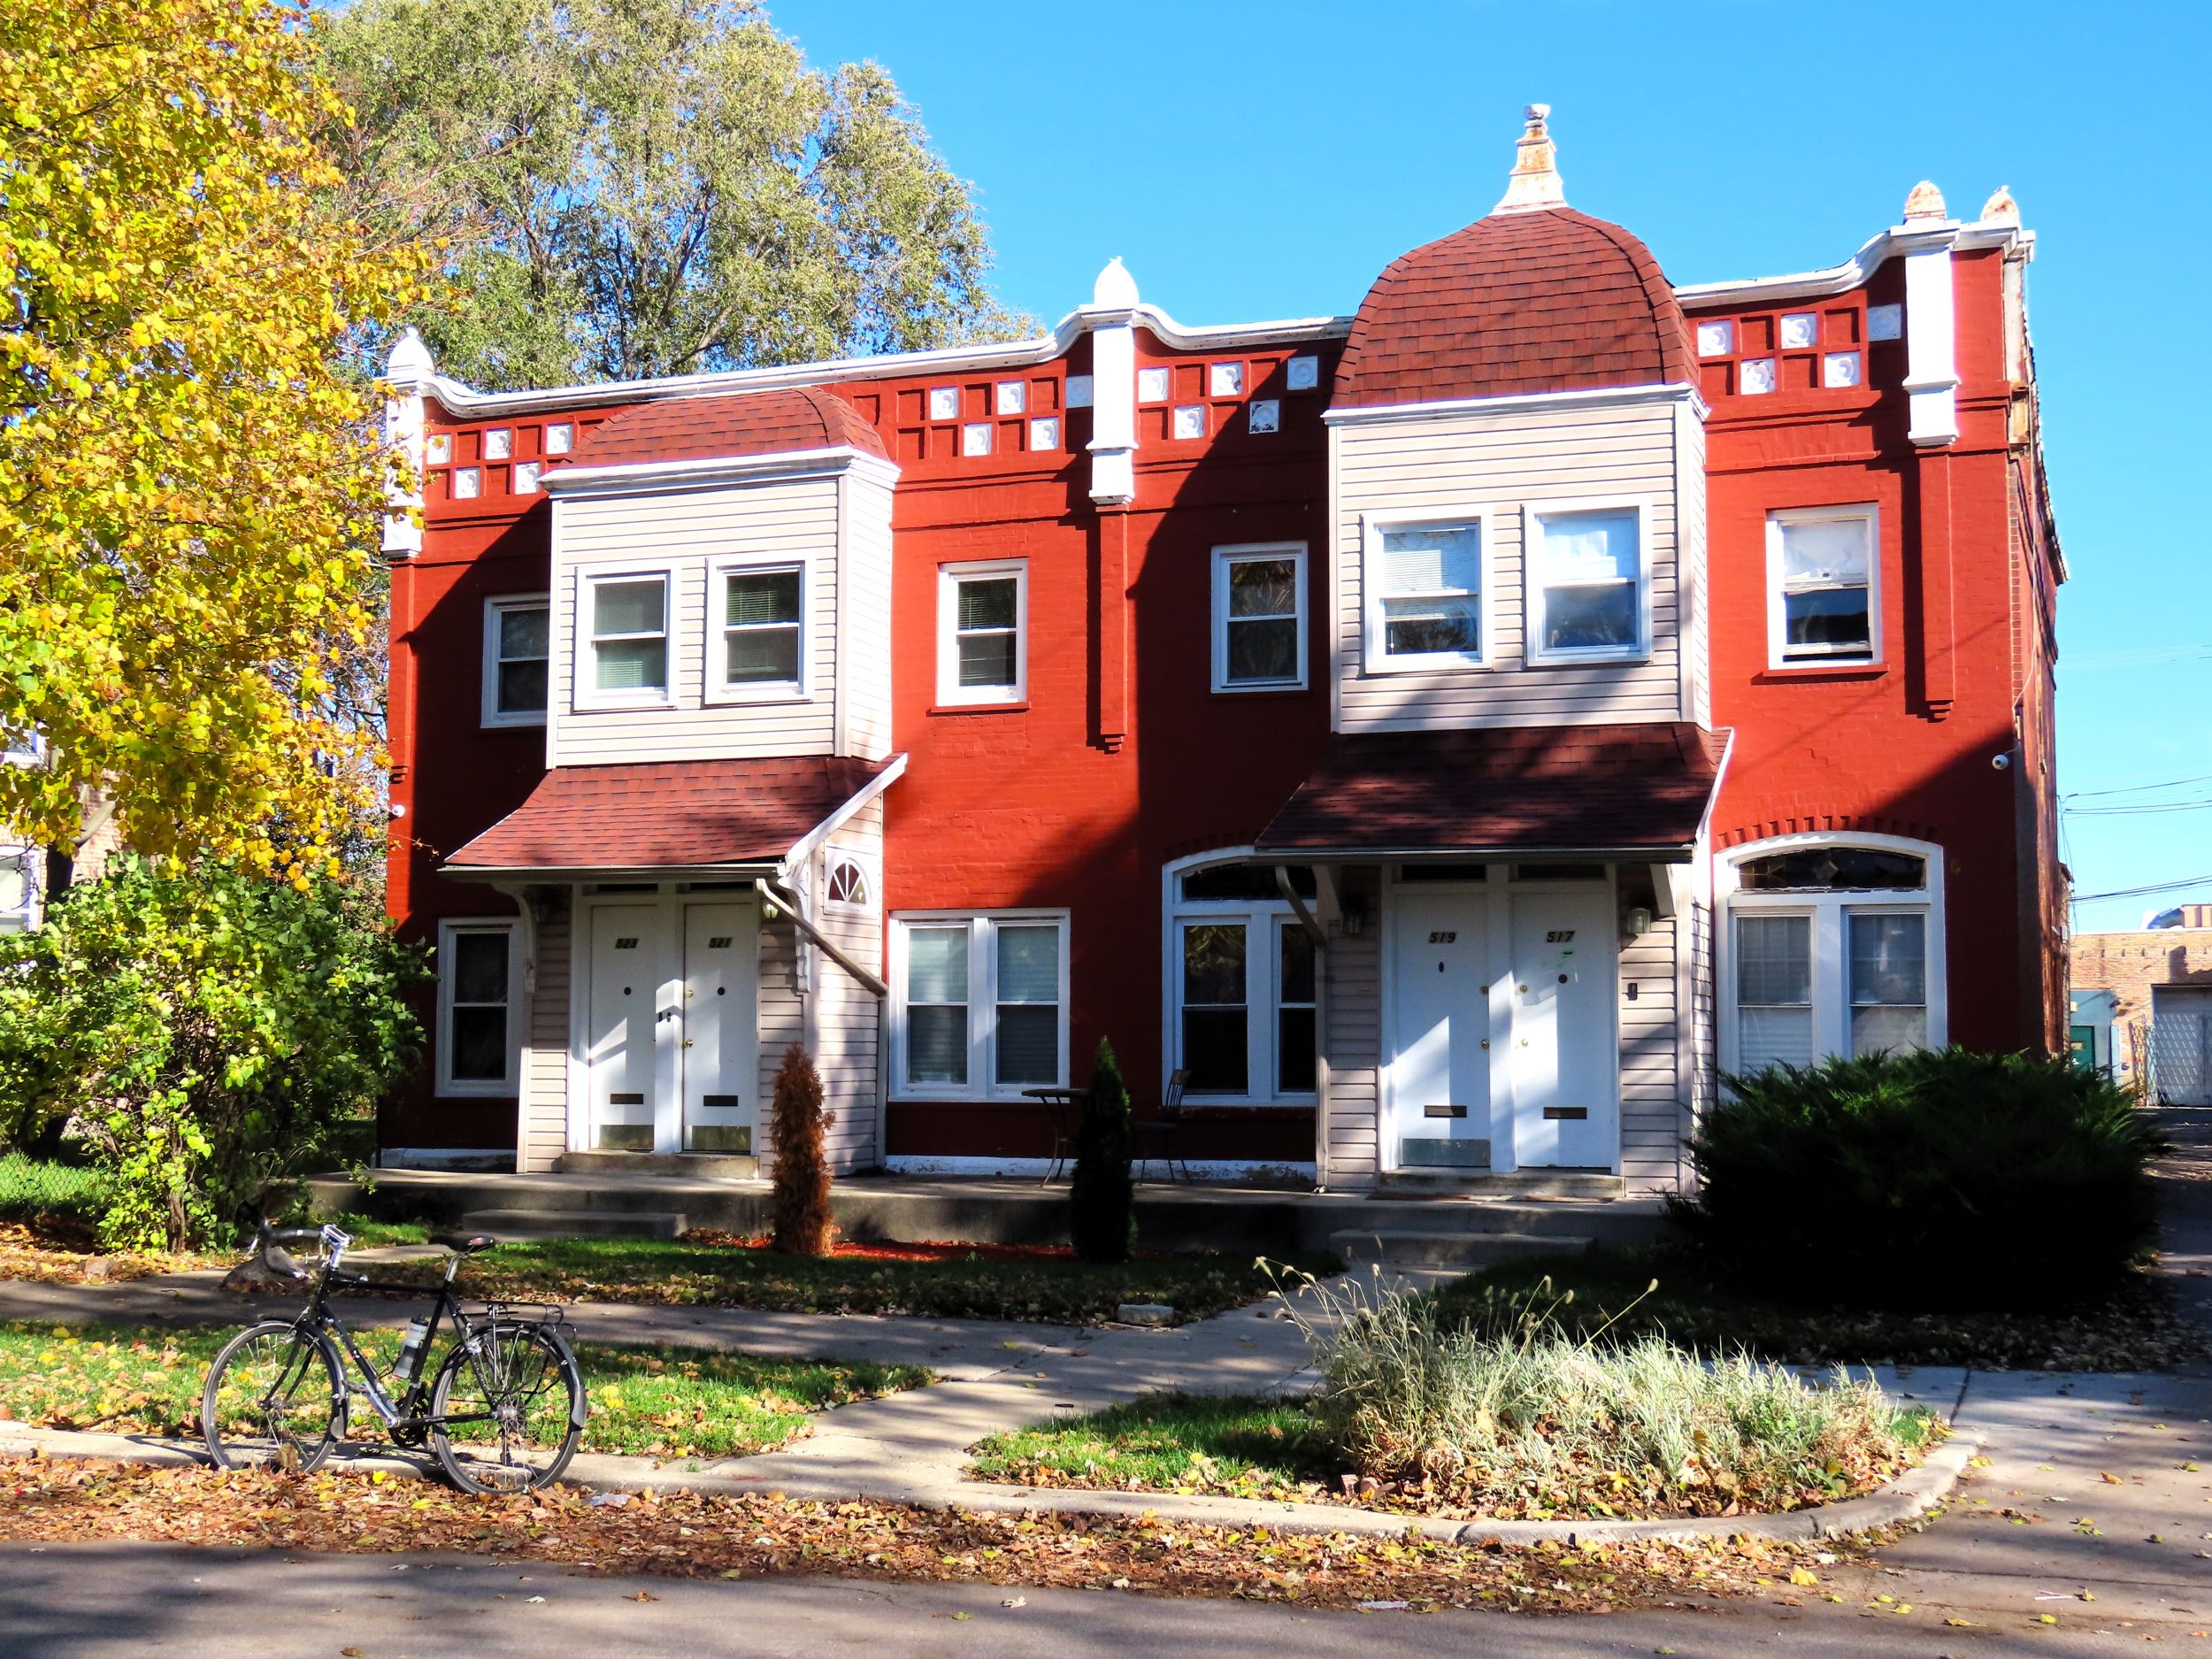 a tour bicycle standing at front of a red brick Queen Anne two story mini rowhouse with four units,